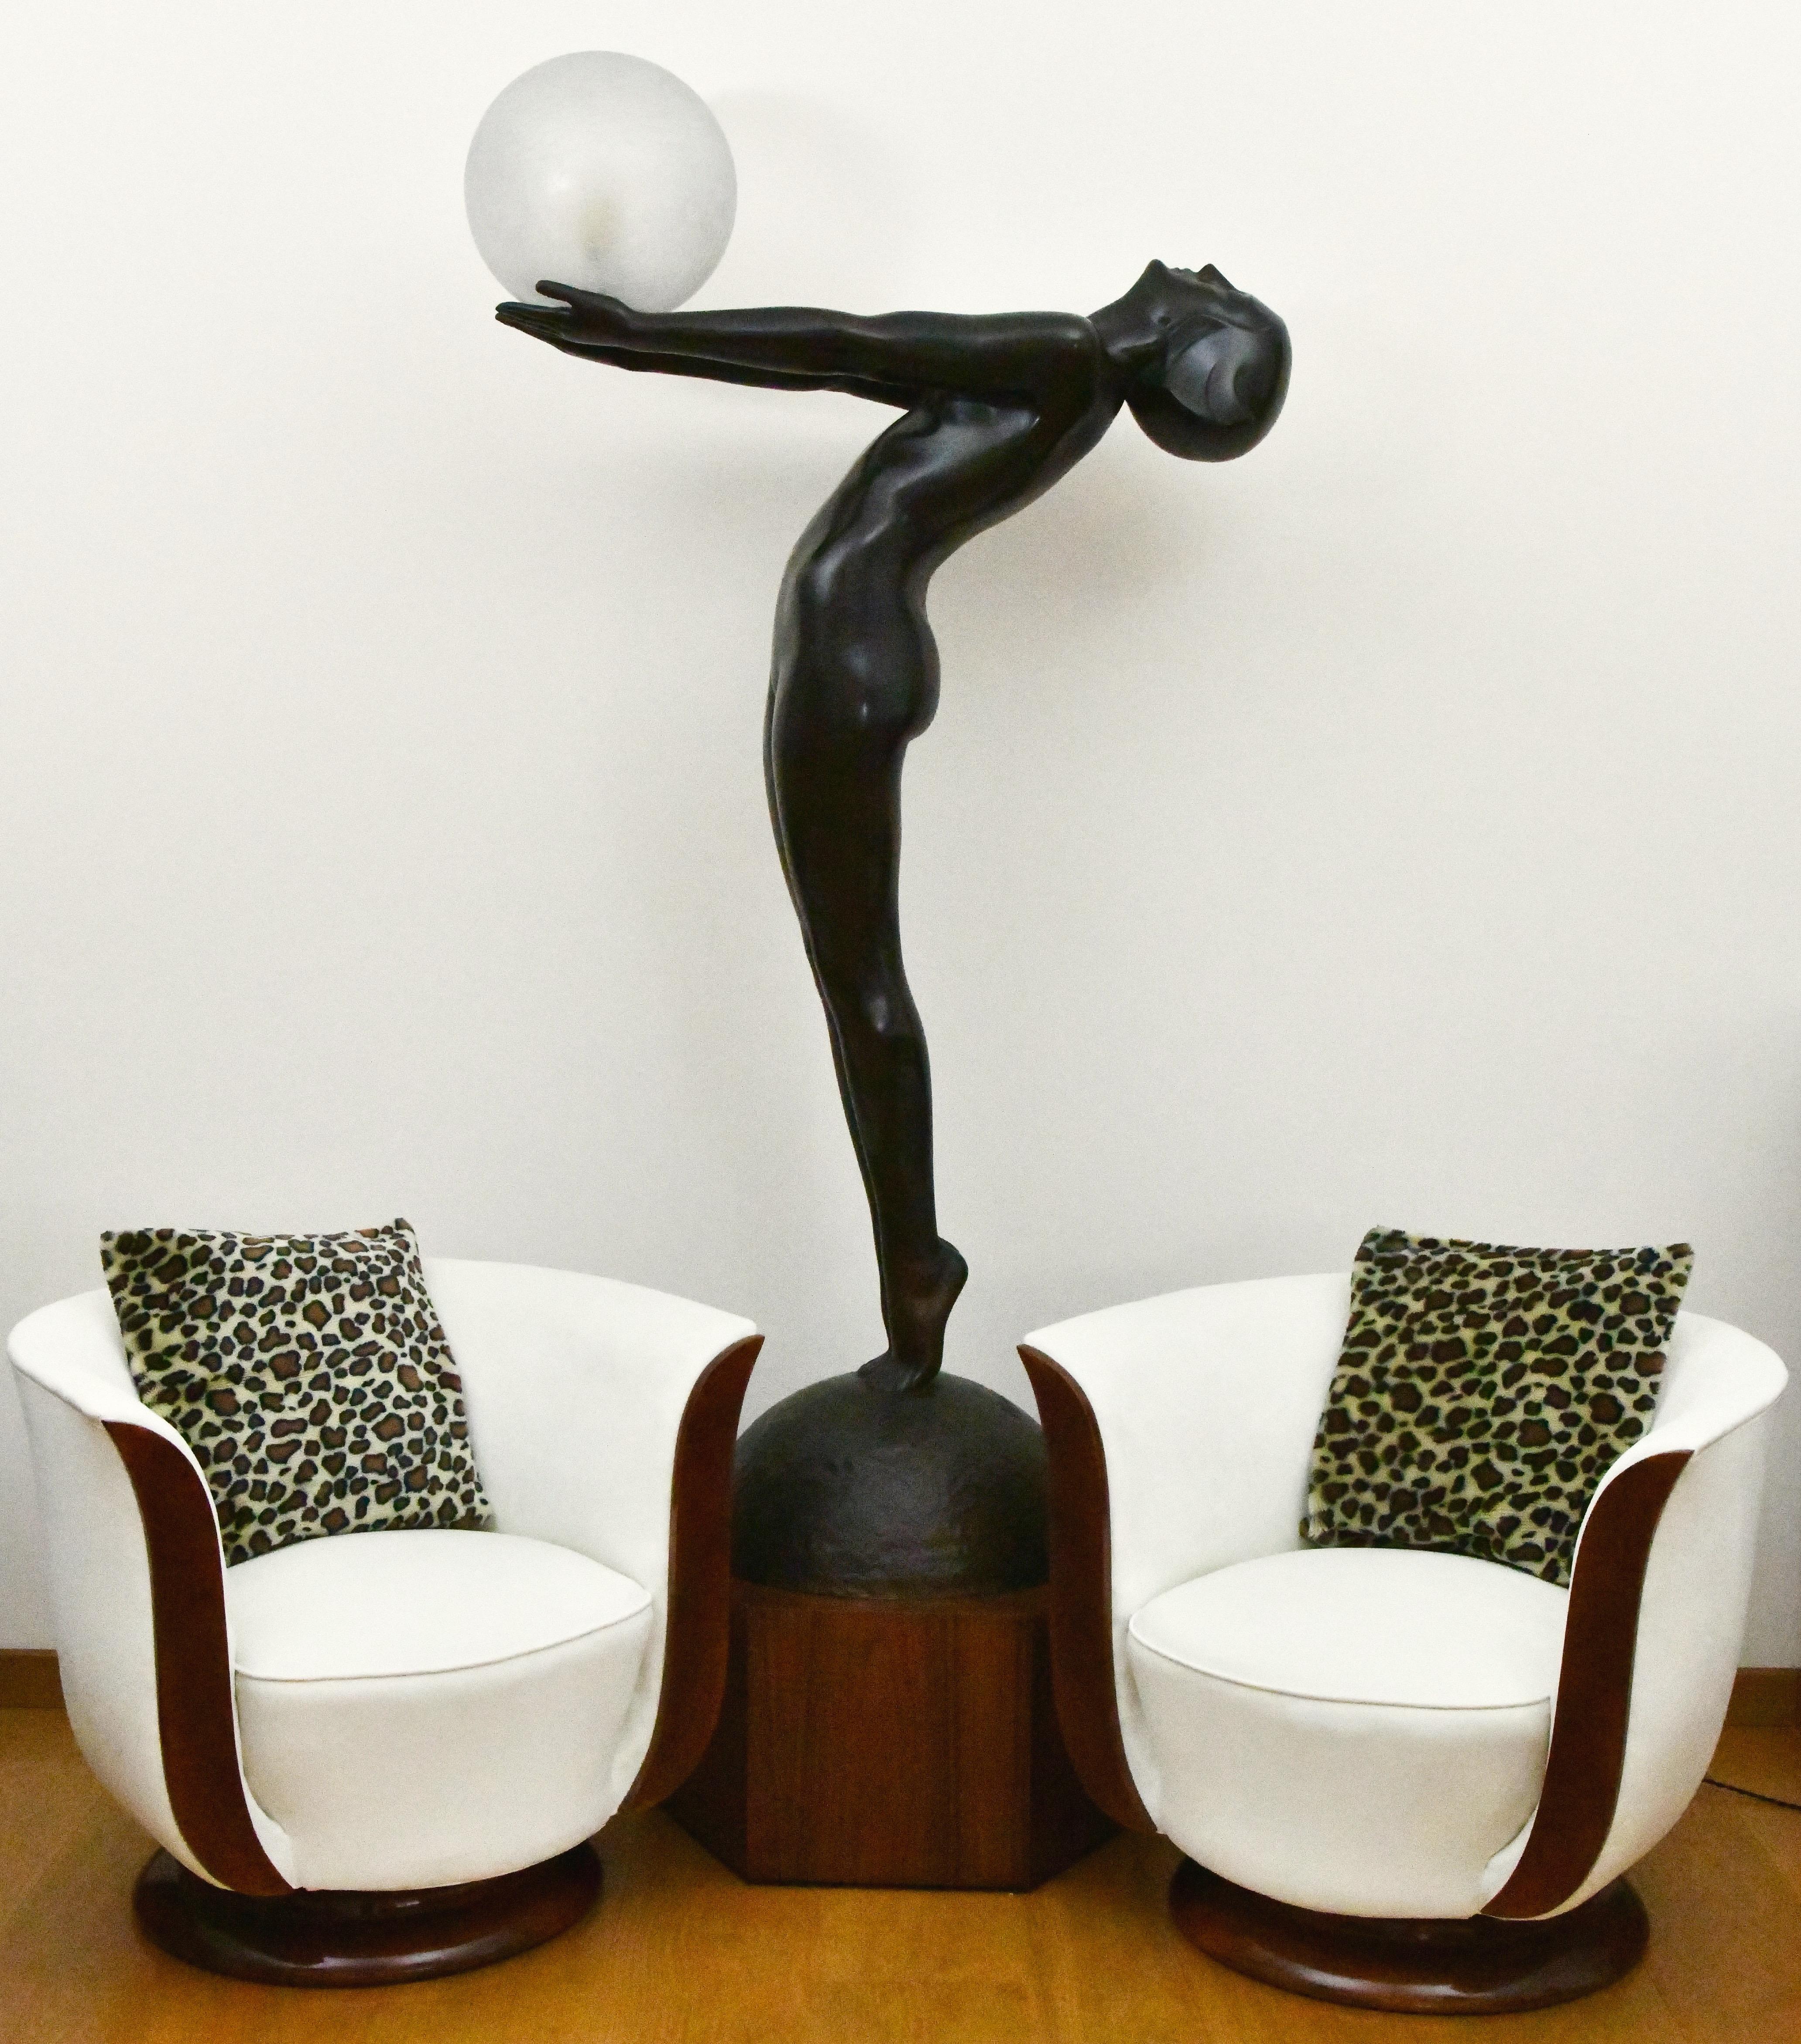 Clarté life size Art Deco bronze lamp standing nude with globe by Max Le Verrier. Patinated bronze on octagonal wooden base and with crackled glass globe. Design 1928. Posthumous cast at the Le Verrier foundry. 
Hand-crafted. 
With Certificate of